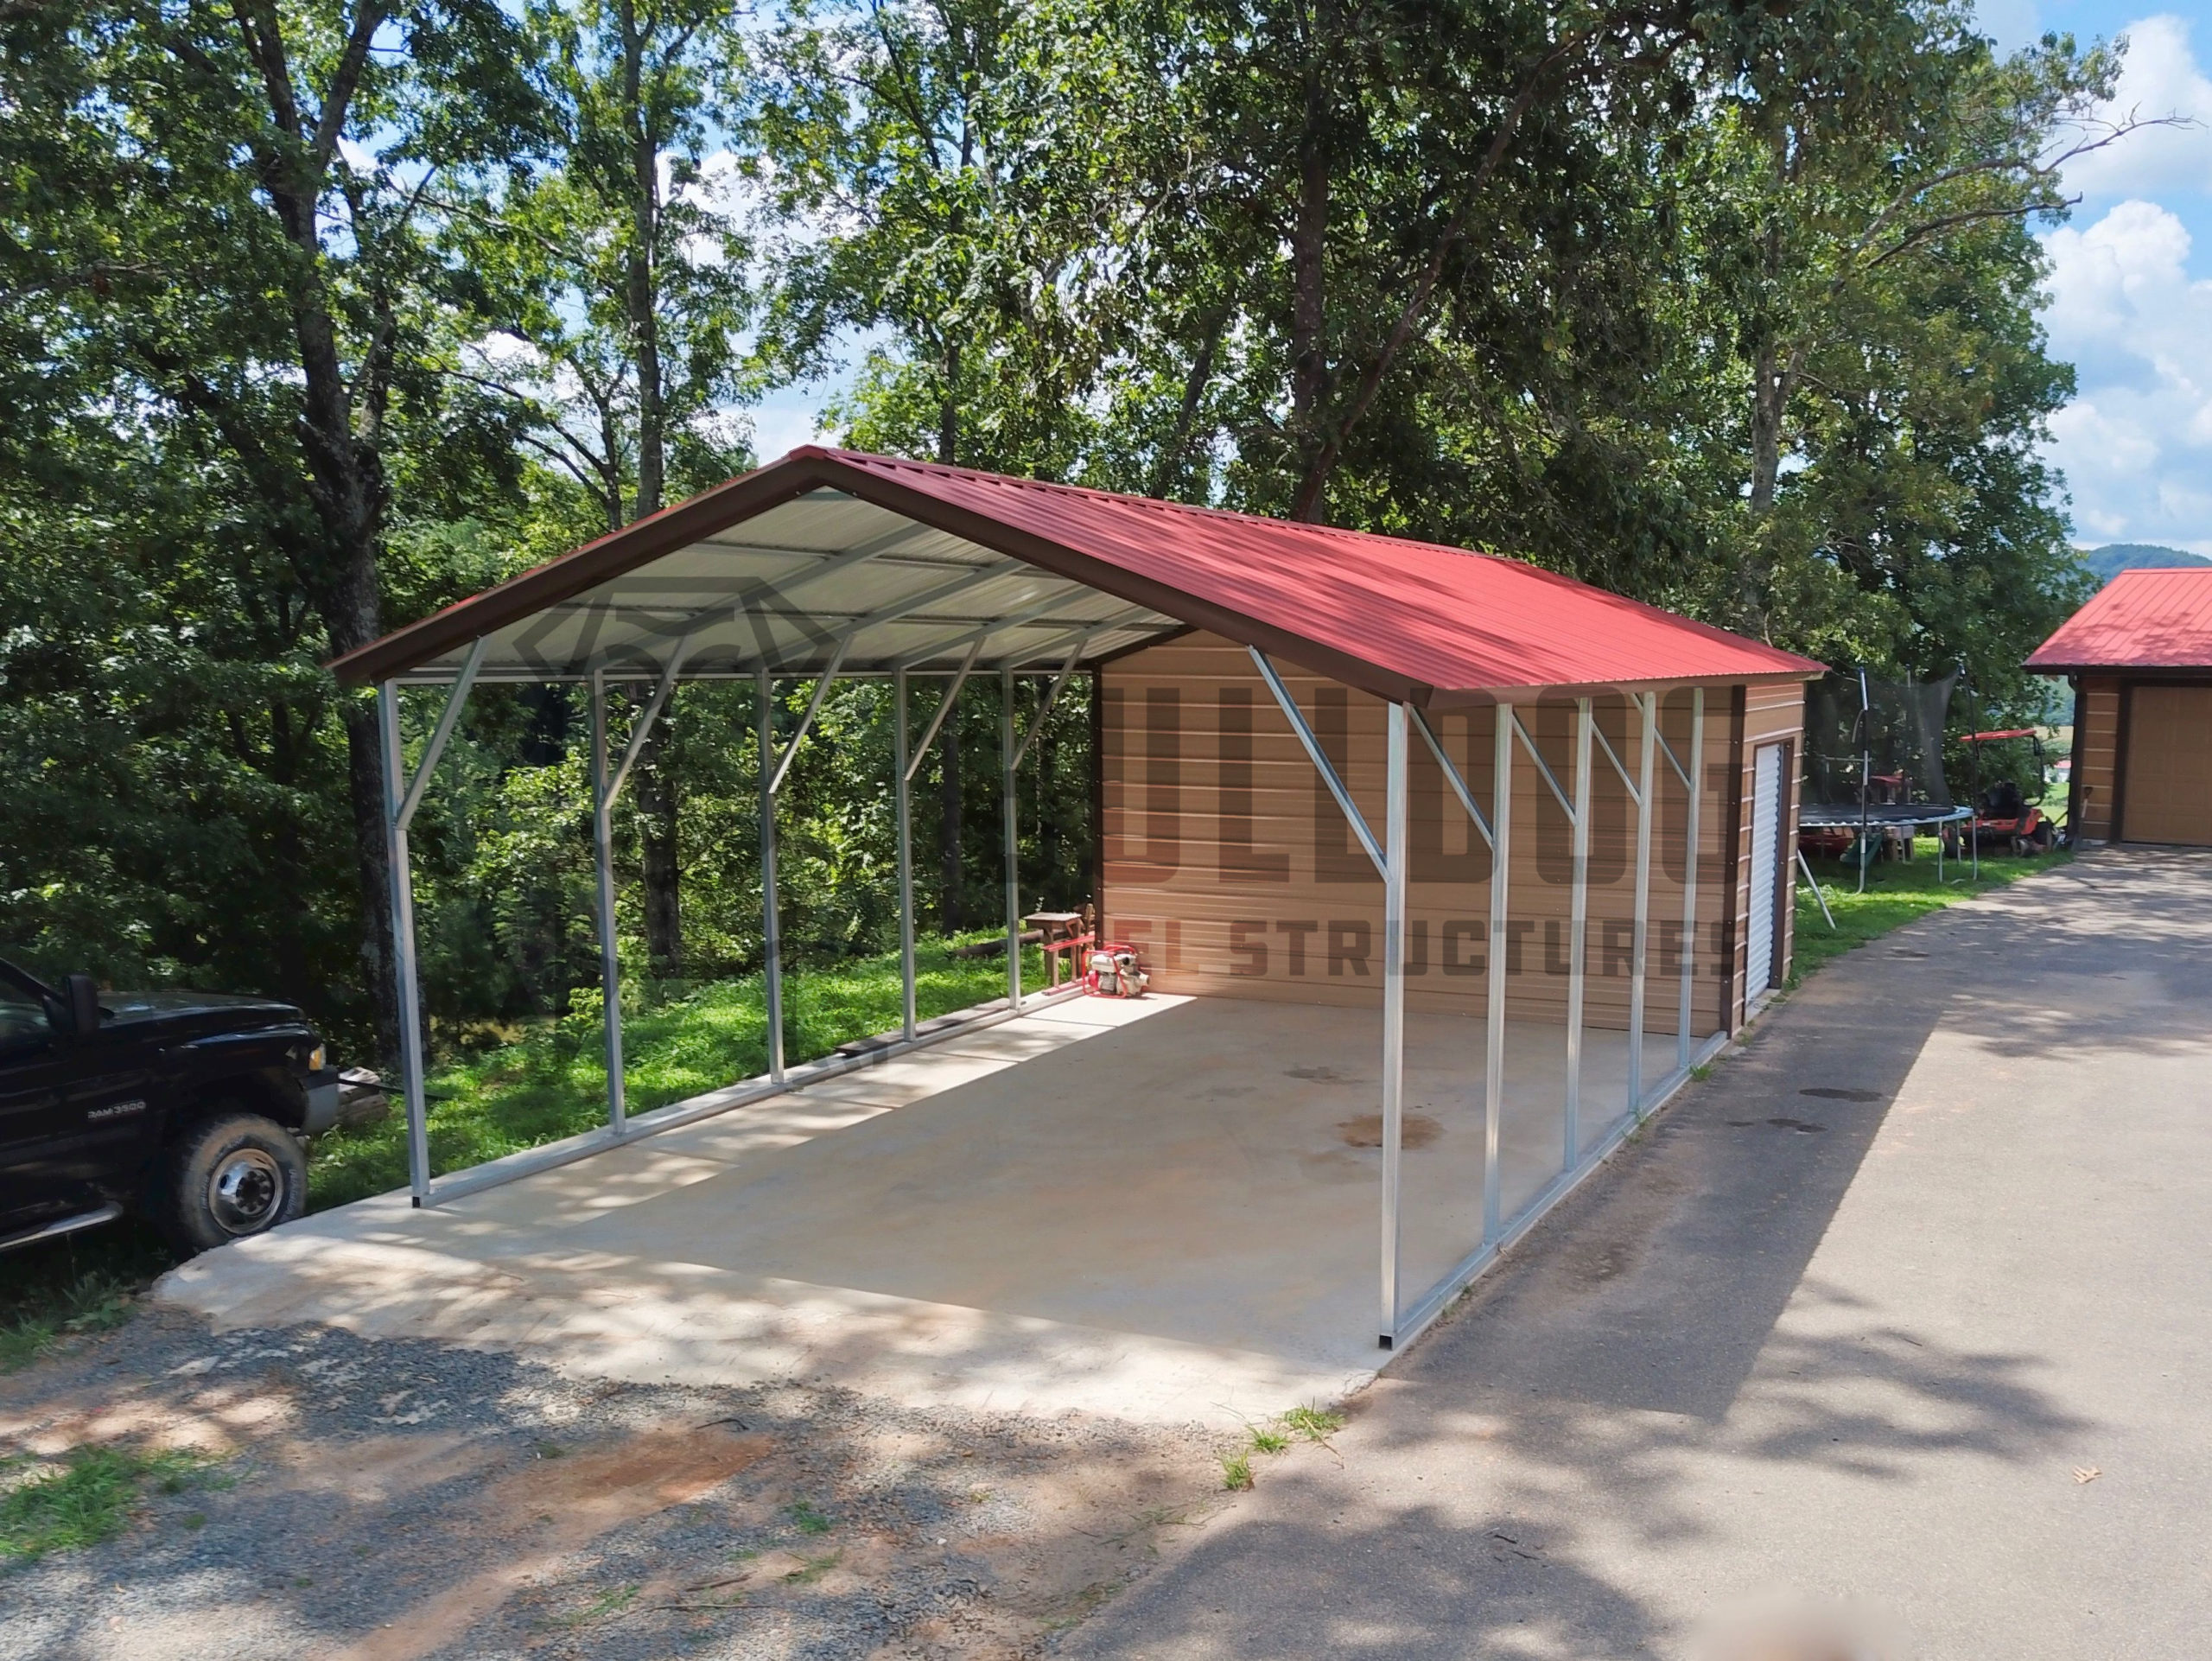 Car port with red roof with attached storage shed